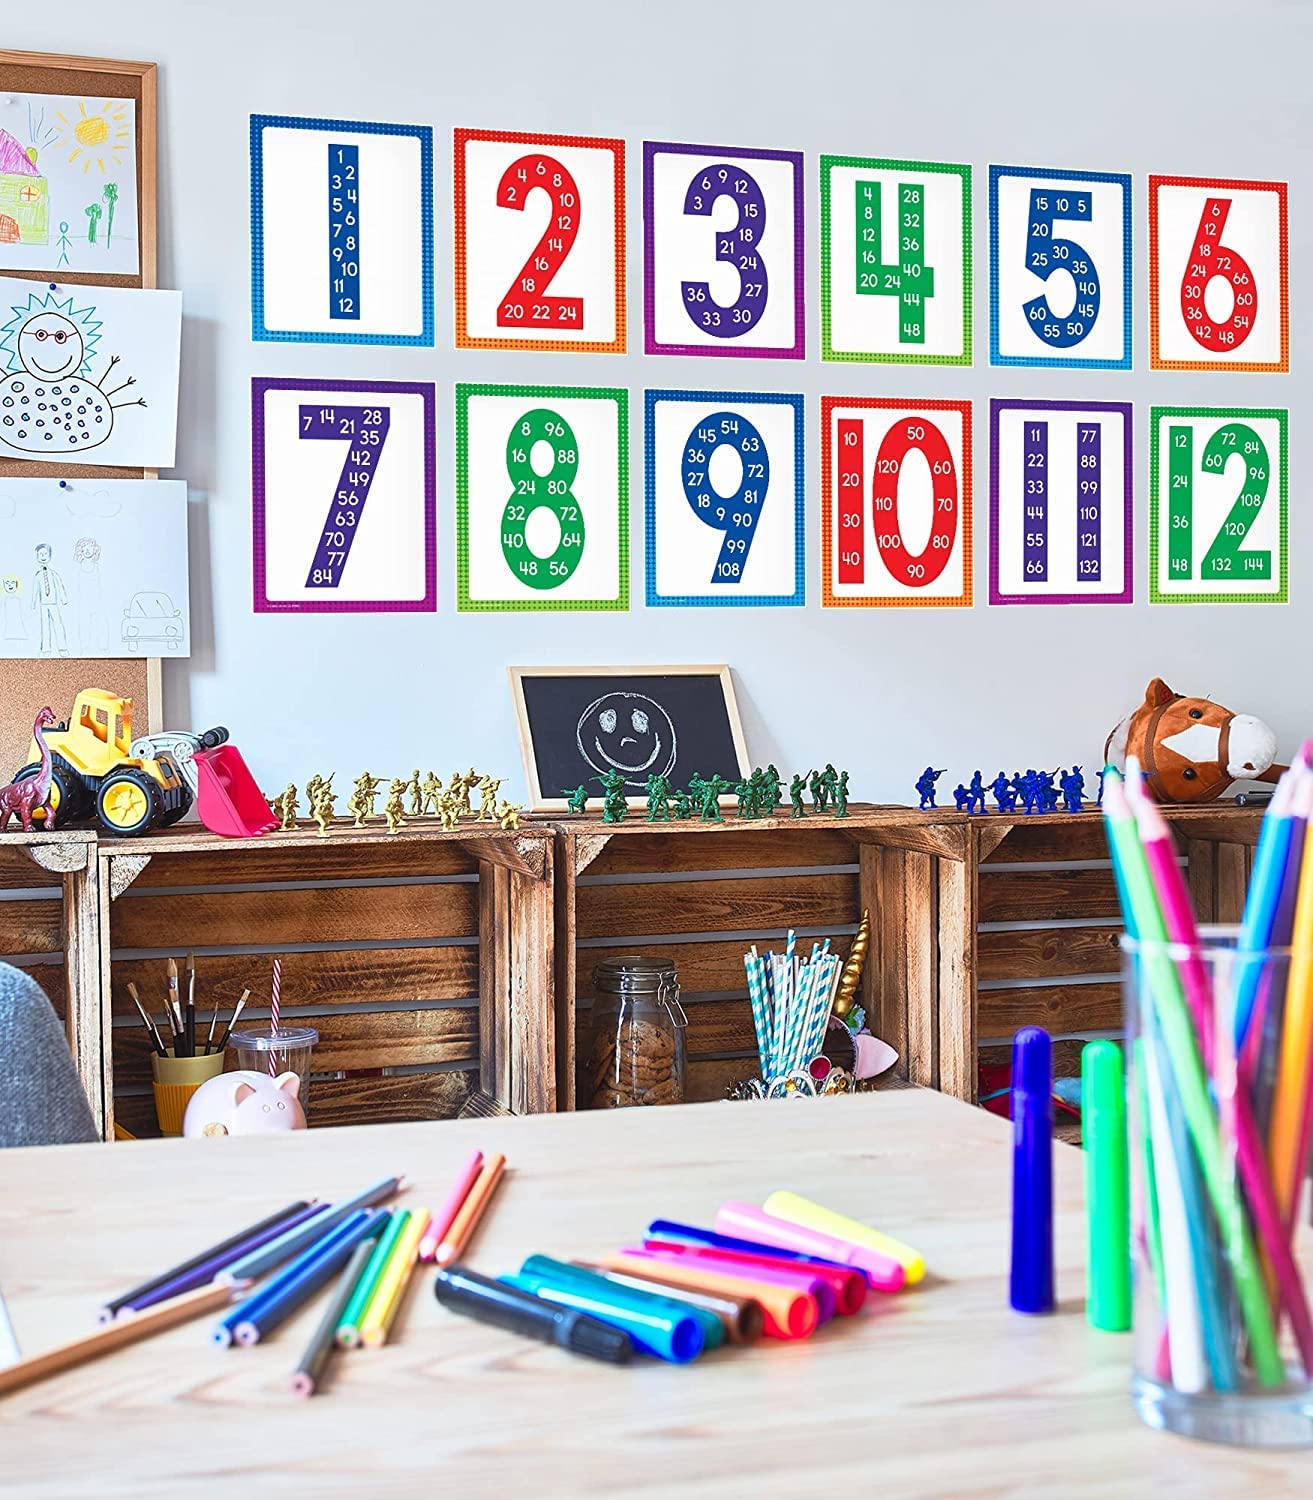 Math Poster Multipack, Includes 12 Multiples of Numbers 1-12